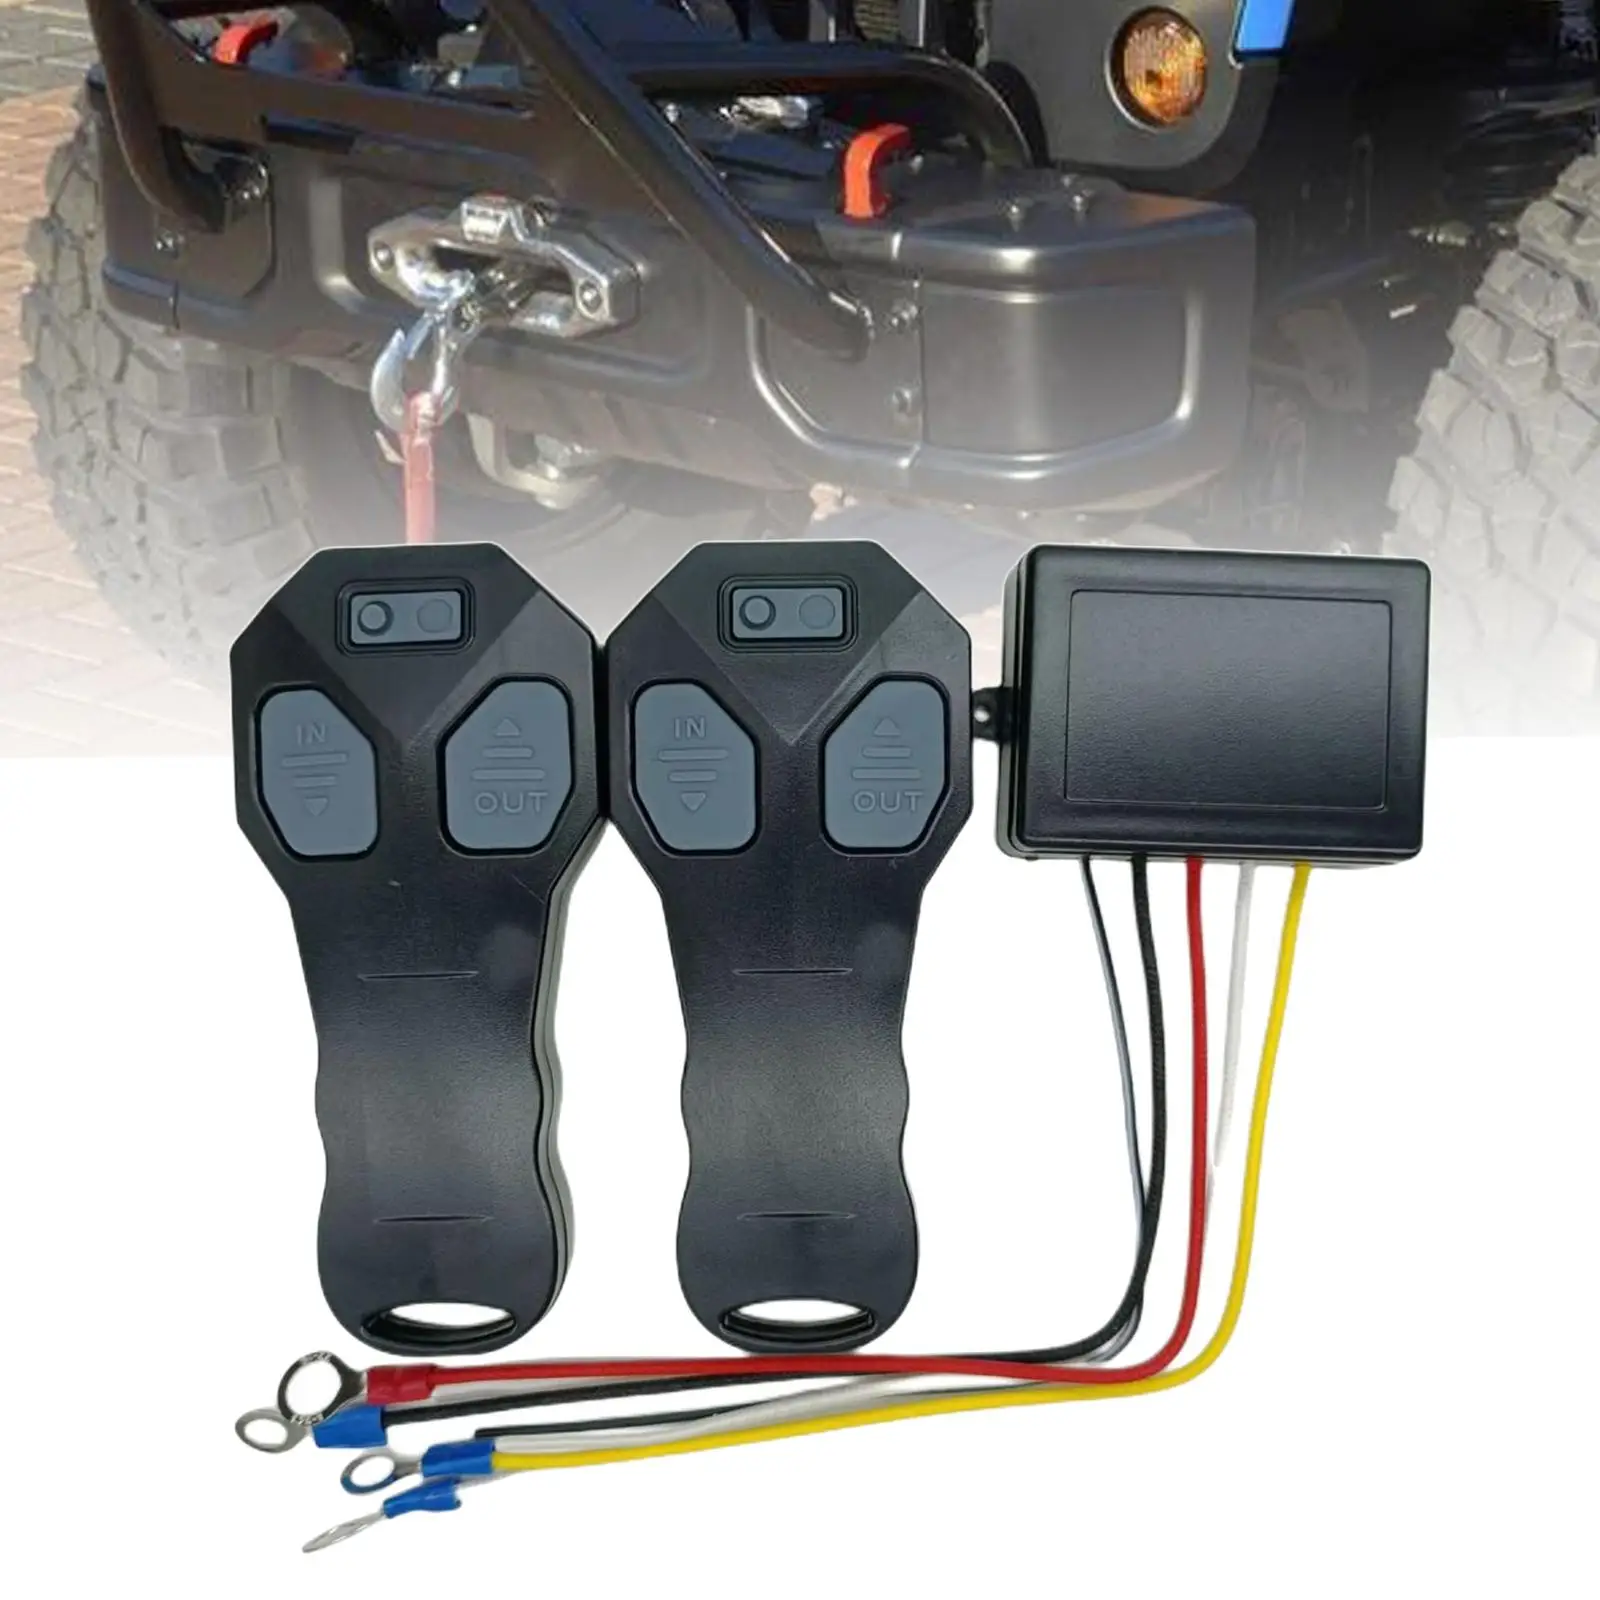 Wireless Winch Remote Control Kit with Indicator Light Waterproof Easy to Install DC12V 24V for Vehicle Car Trailer SUV ATV